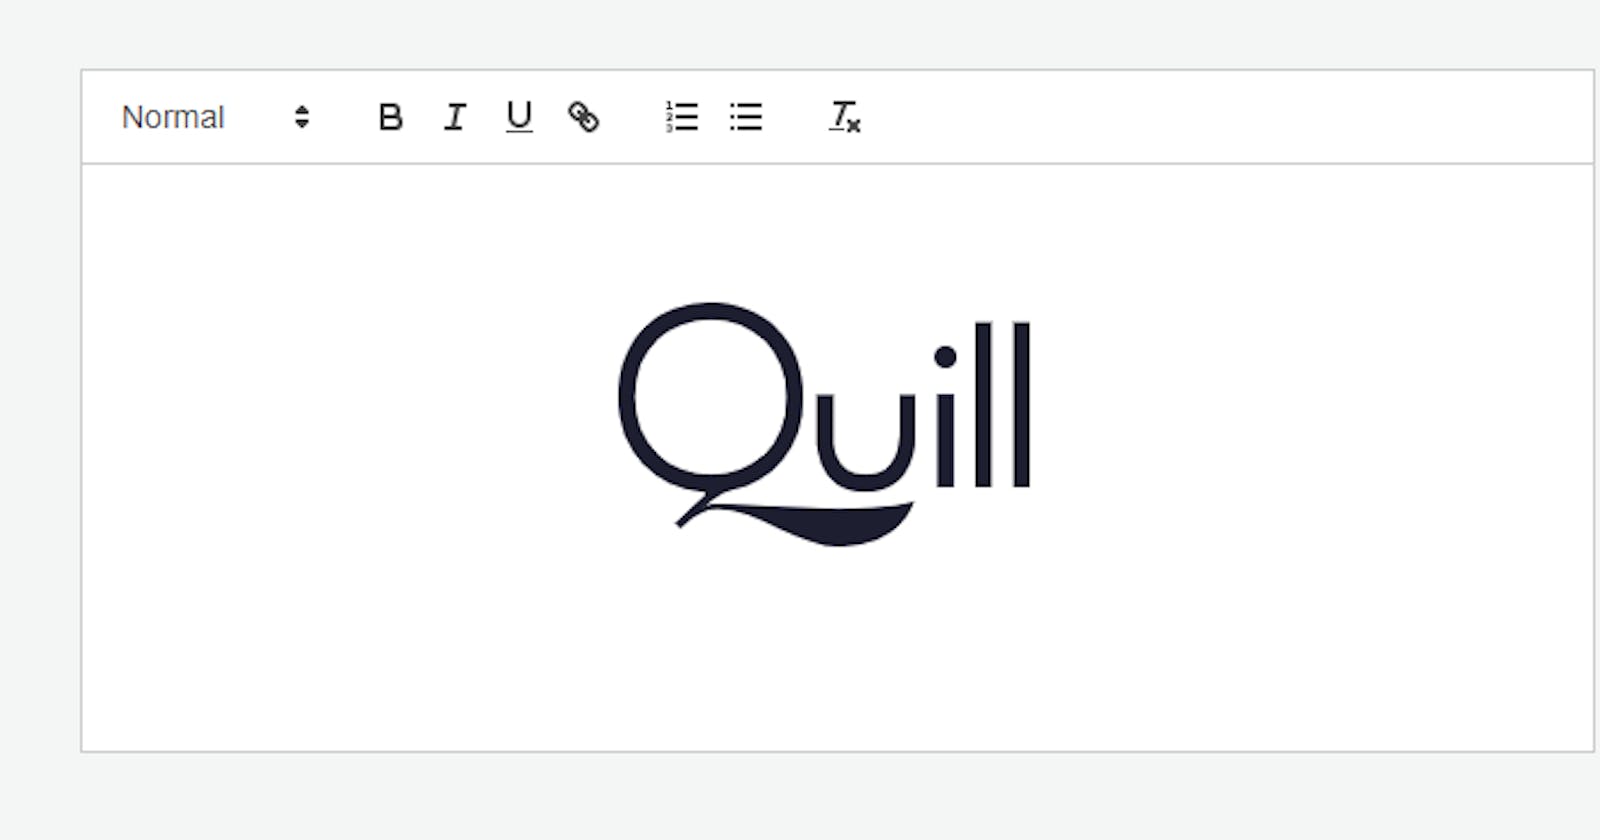 Using the Quill editor in XPages